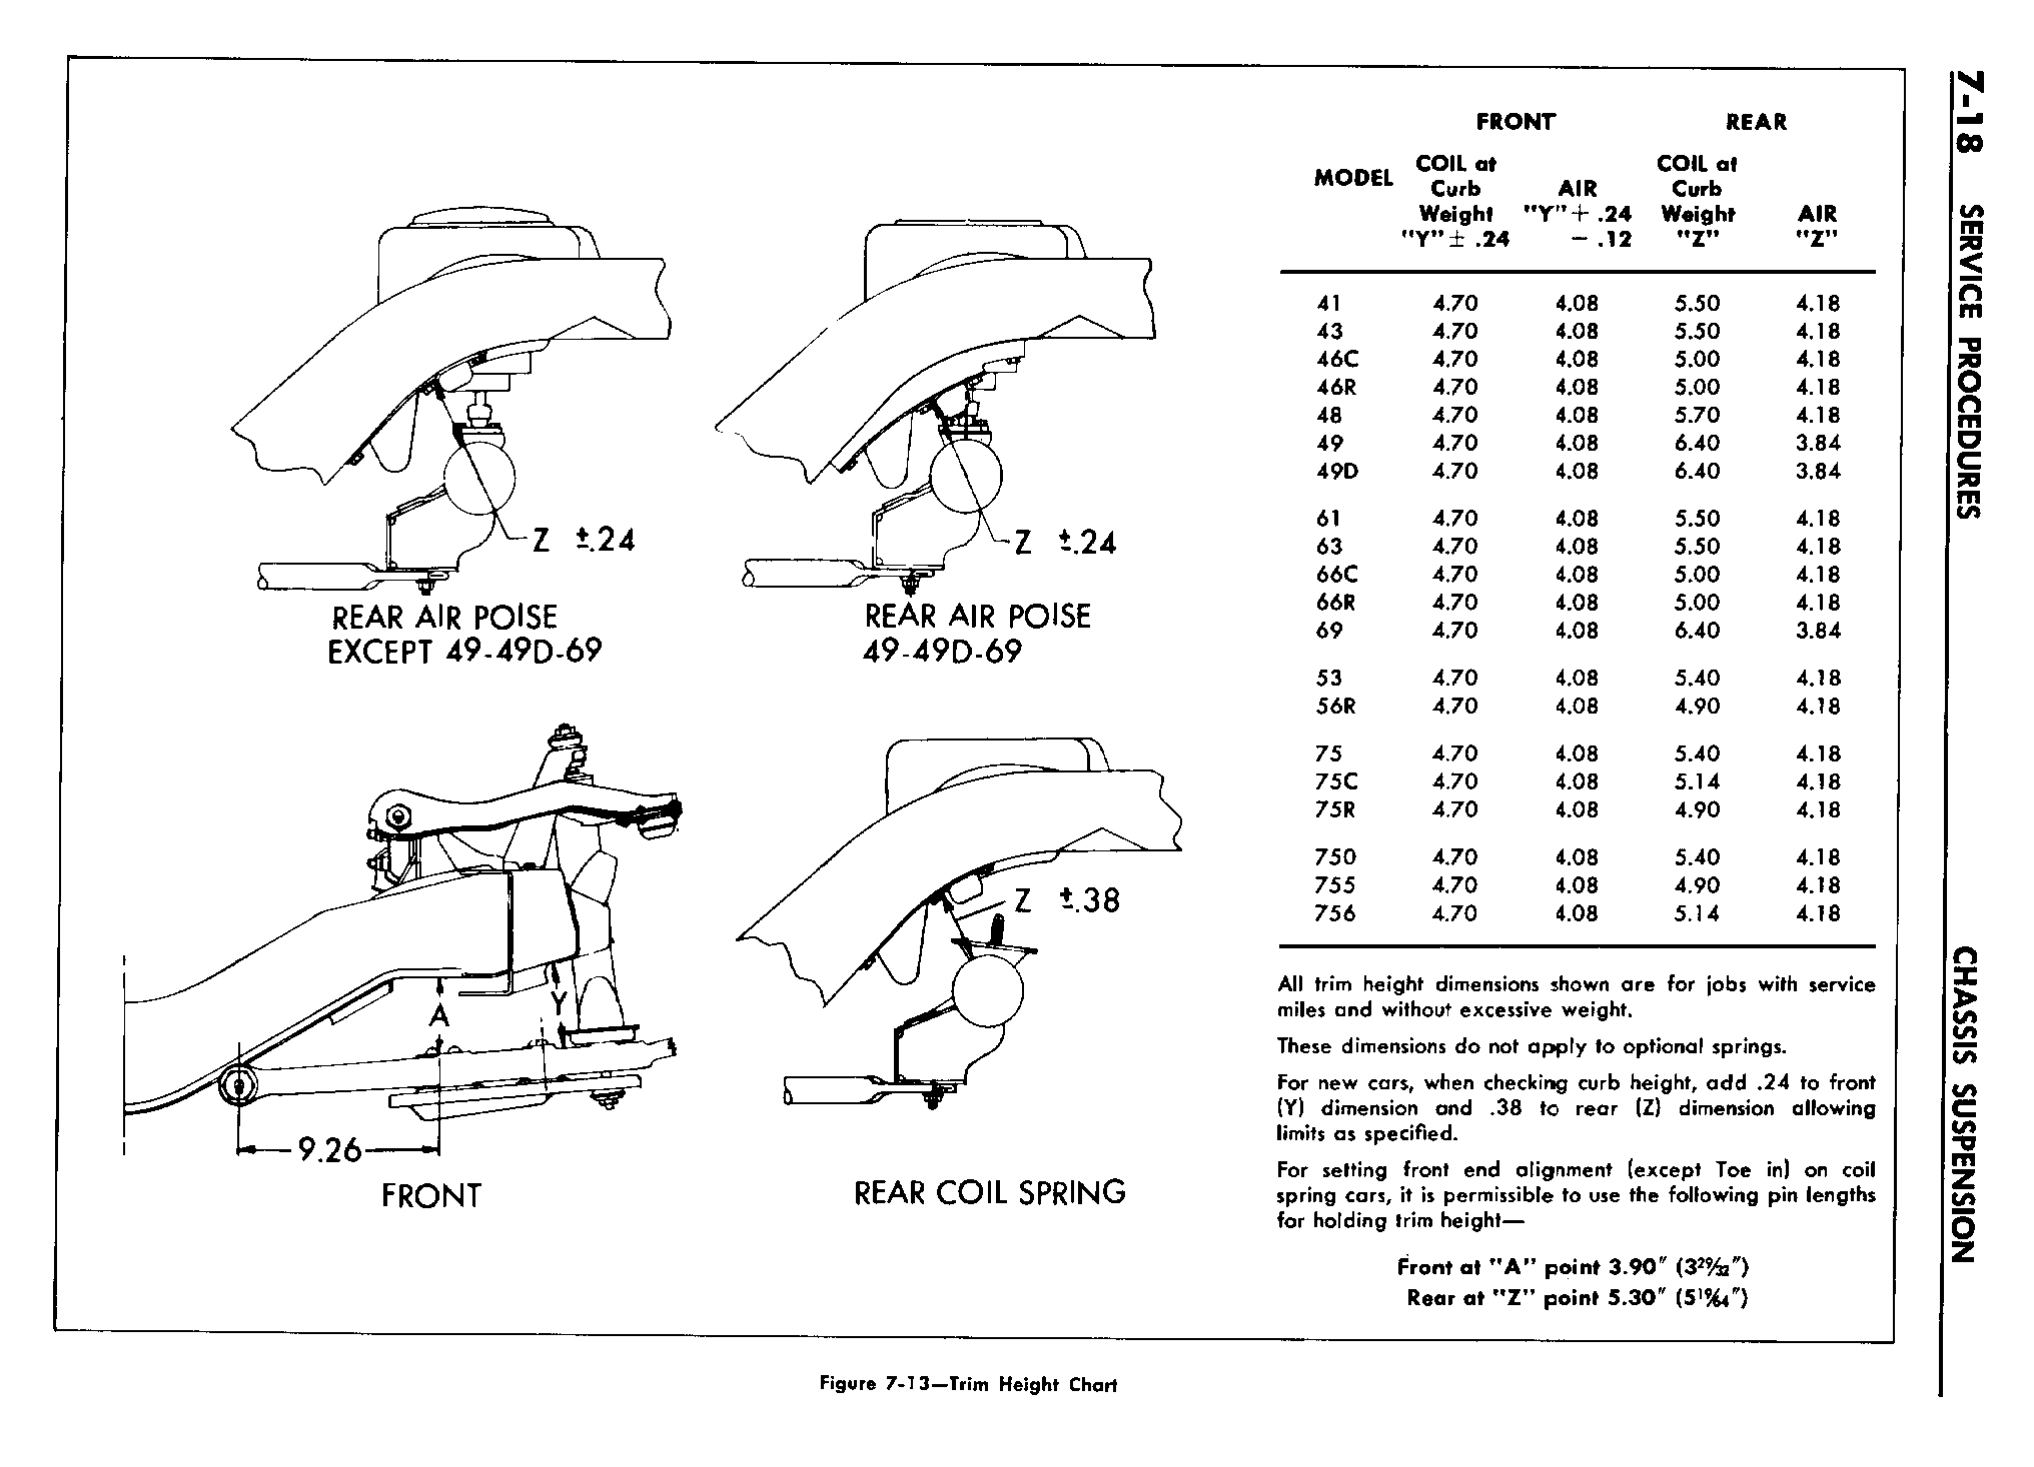 n_08 1958 Buick Shop Manual - Chassis Suspension_18.jpg